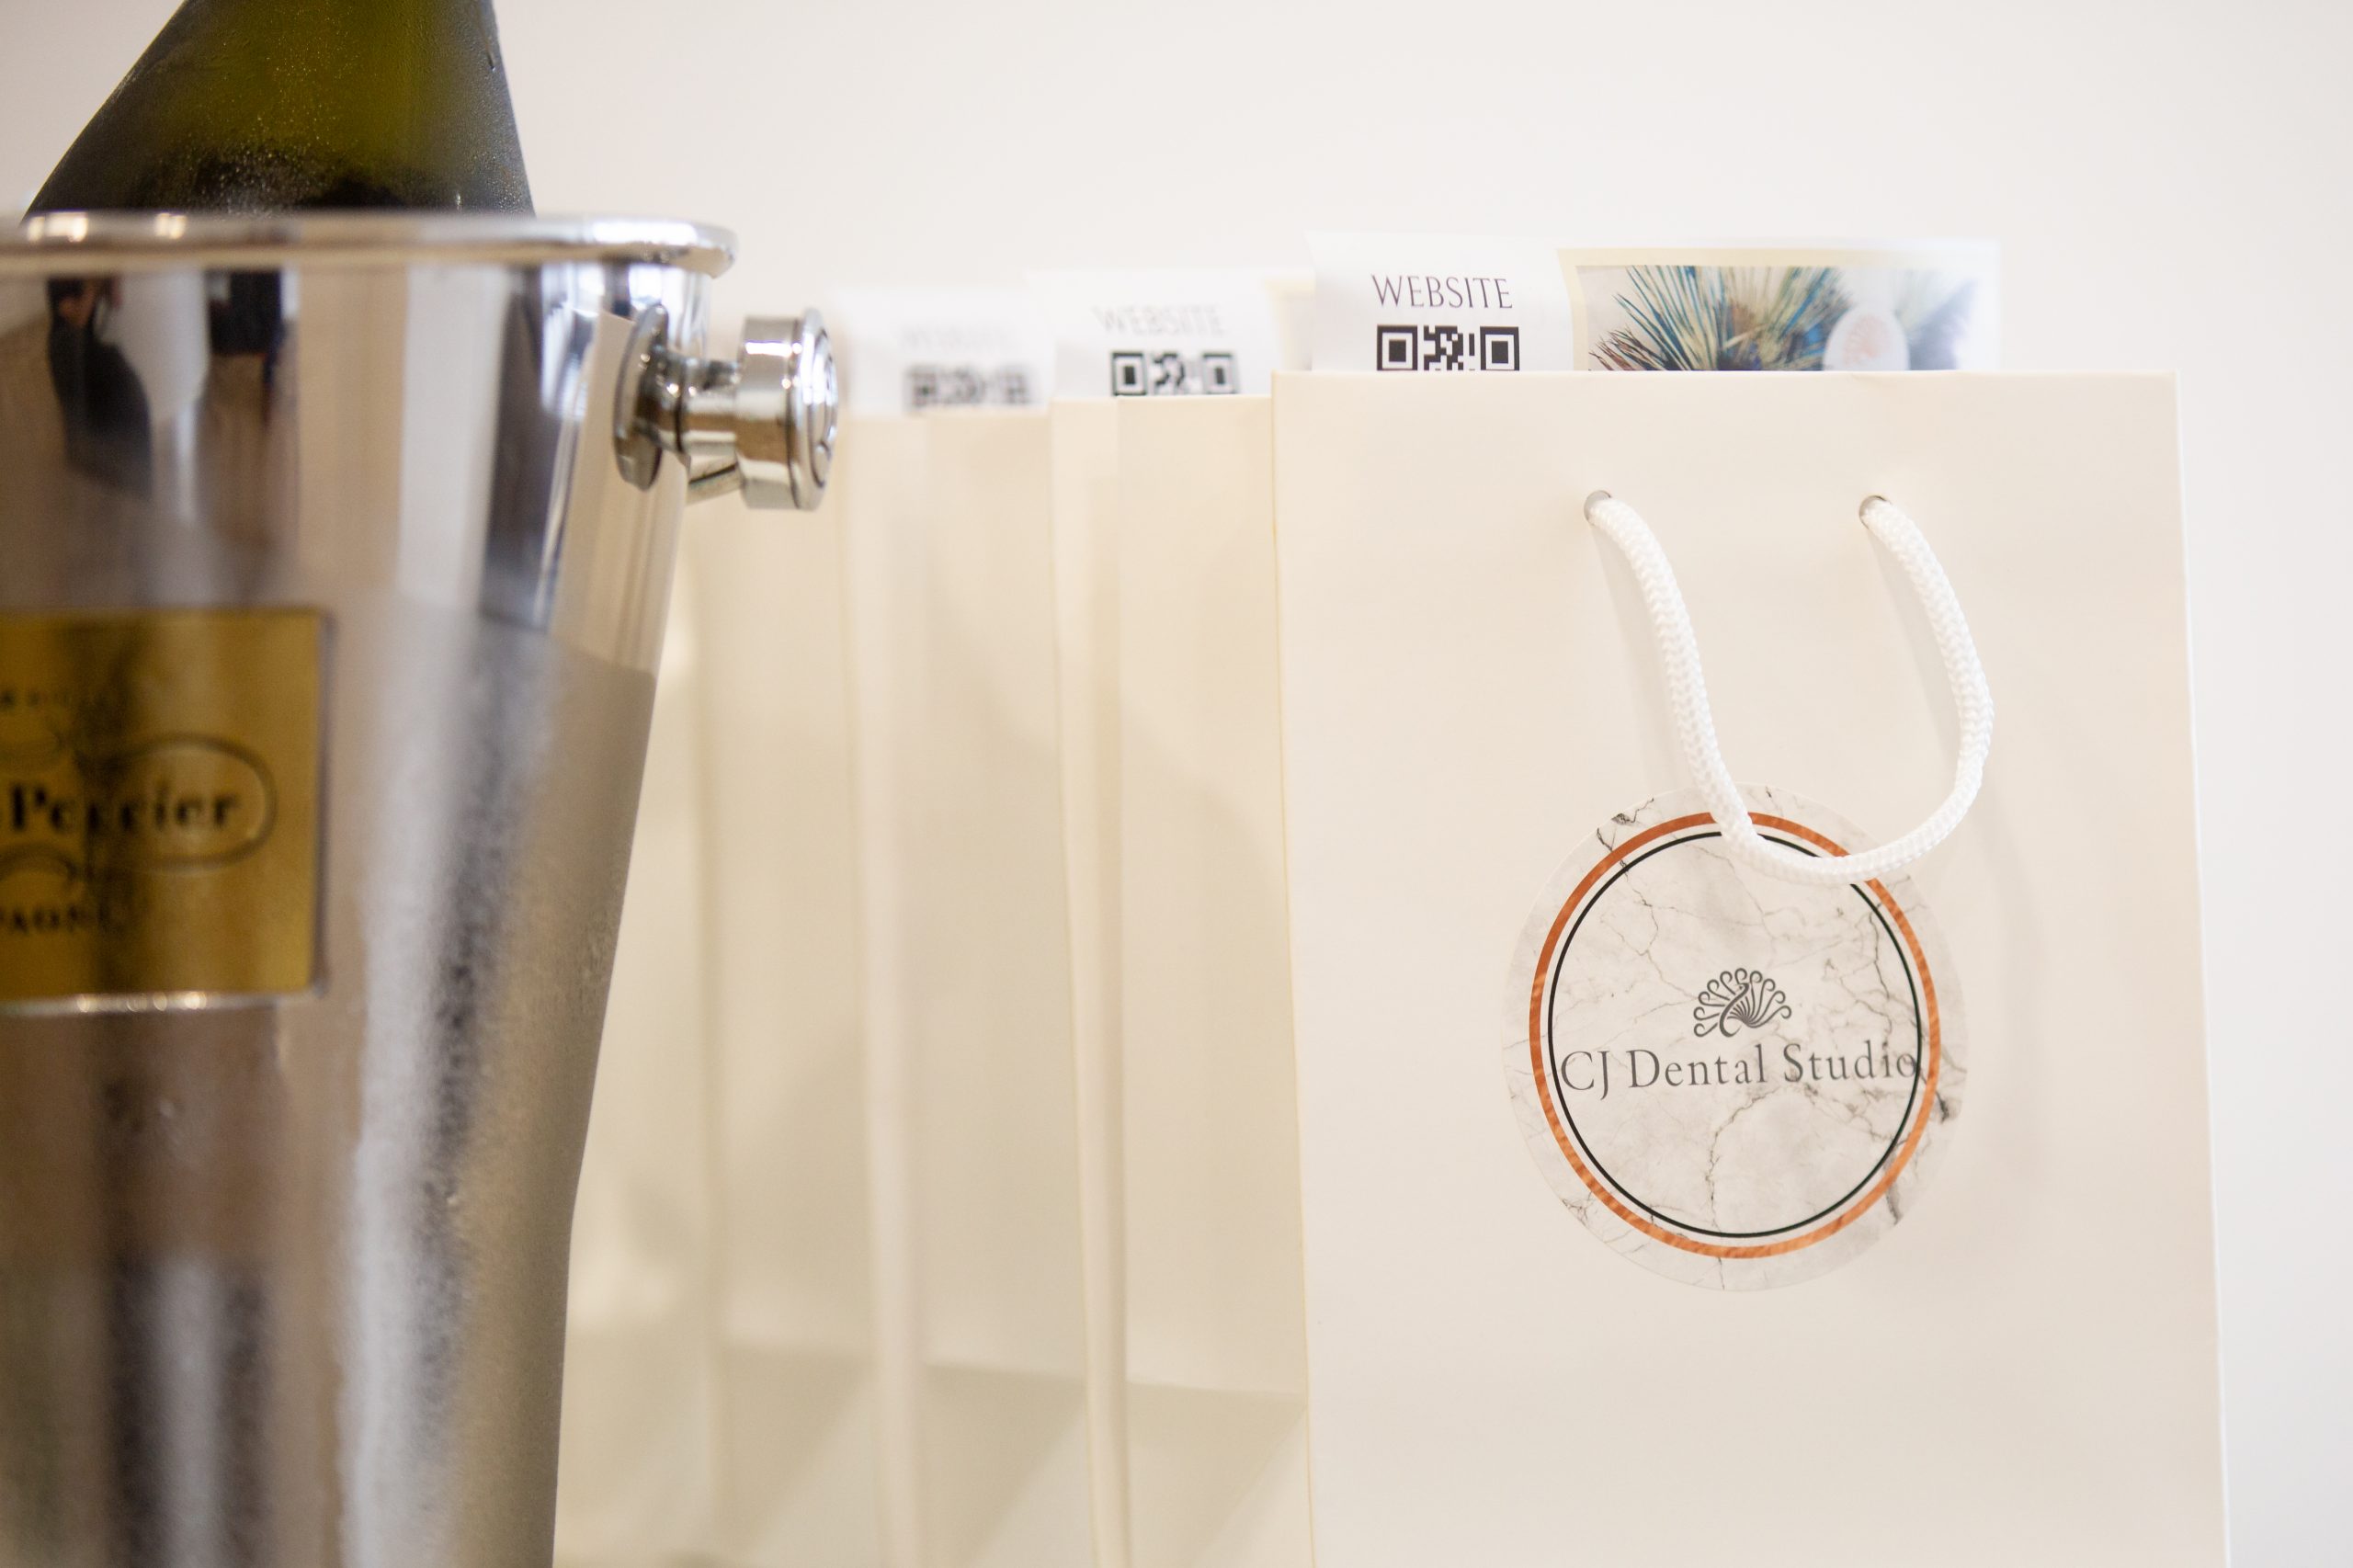 CJ Dental Studio official opening photo drinks and goodie bags close up view.